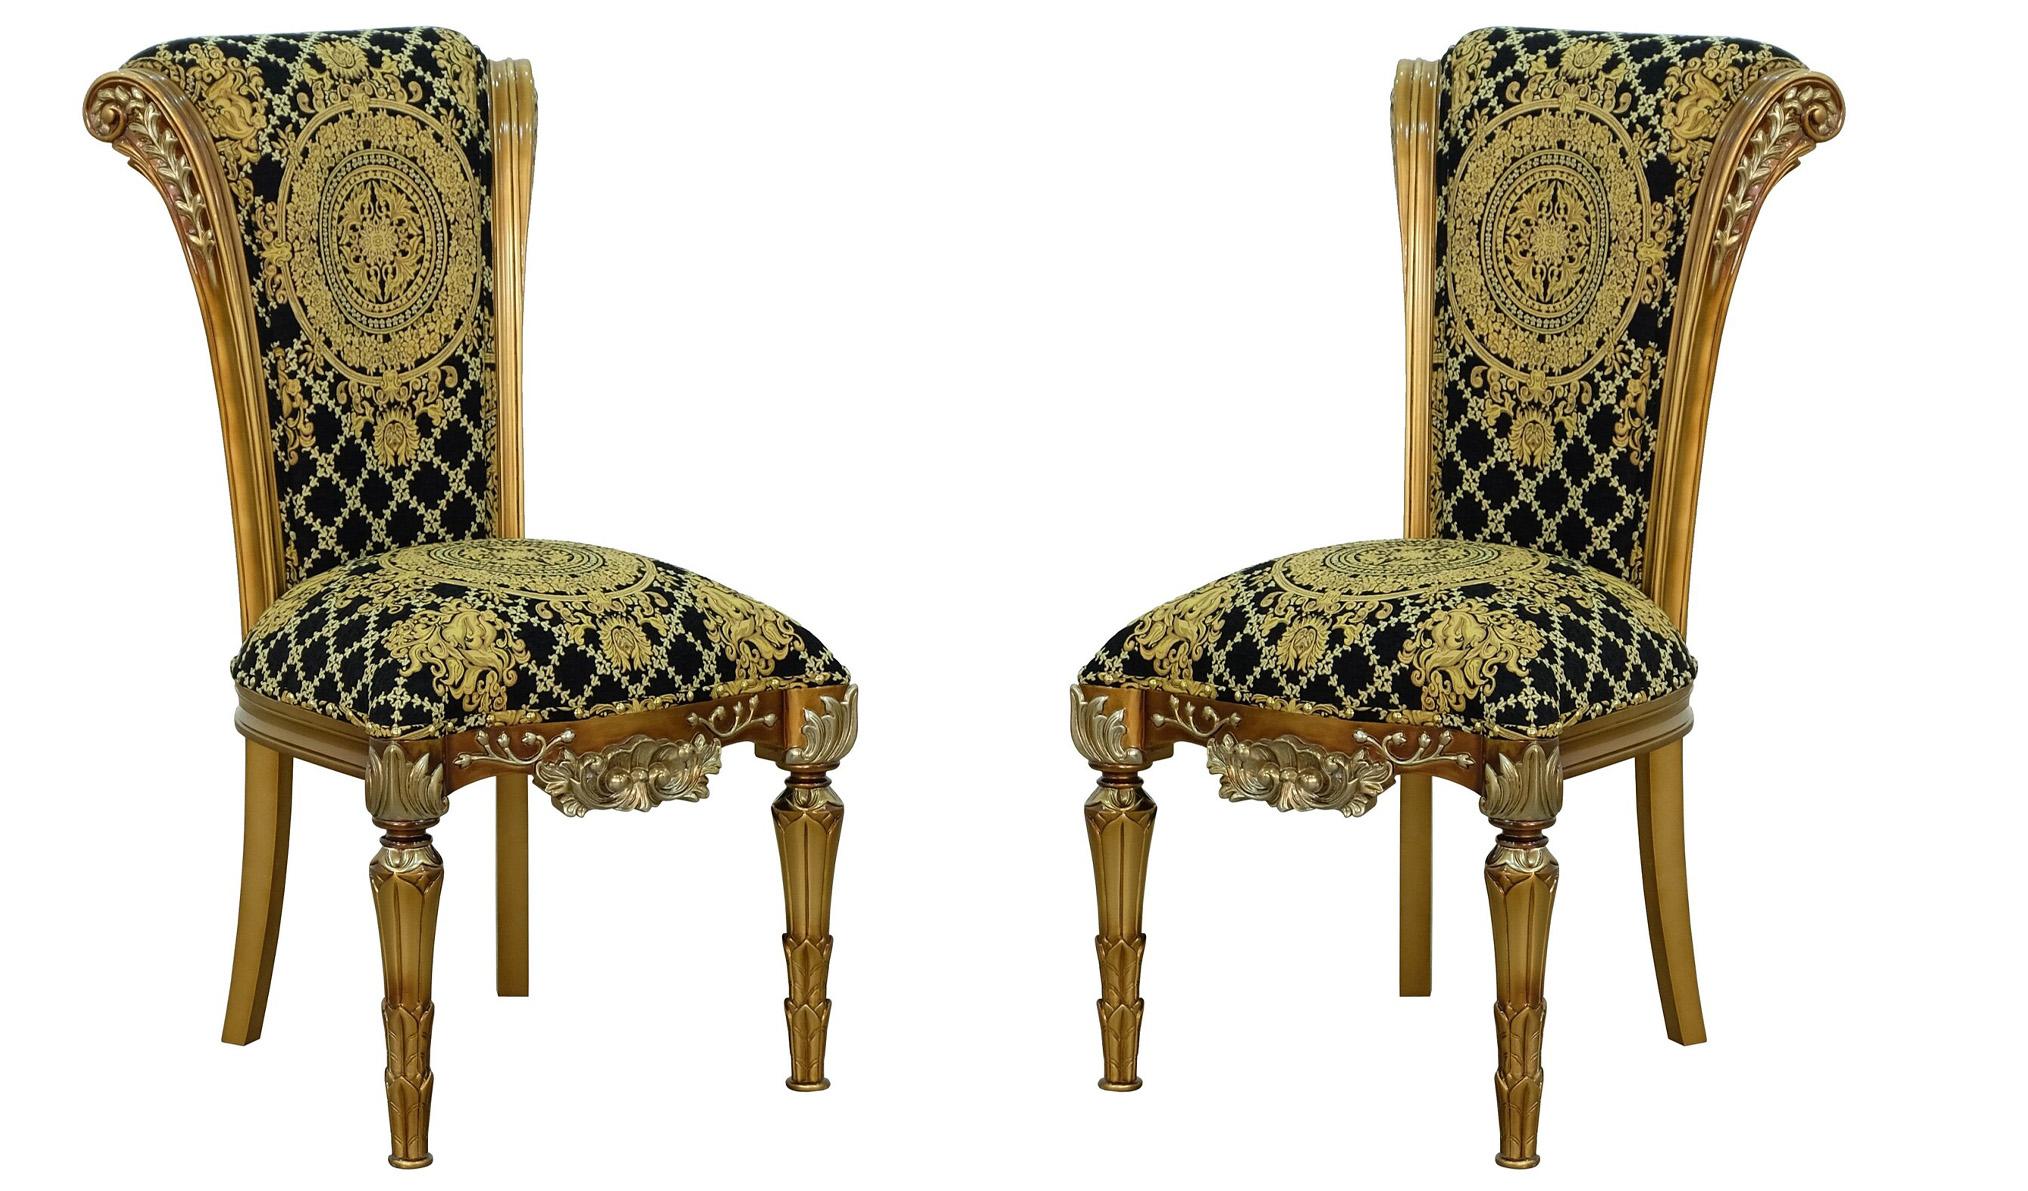 Classic, Traditional Dining Chair Set VALENTINA 61958-SC-Set-2 in Ebony, Gold, Bronze, Black Fabric